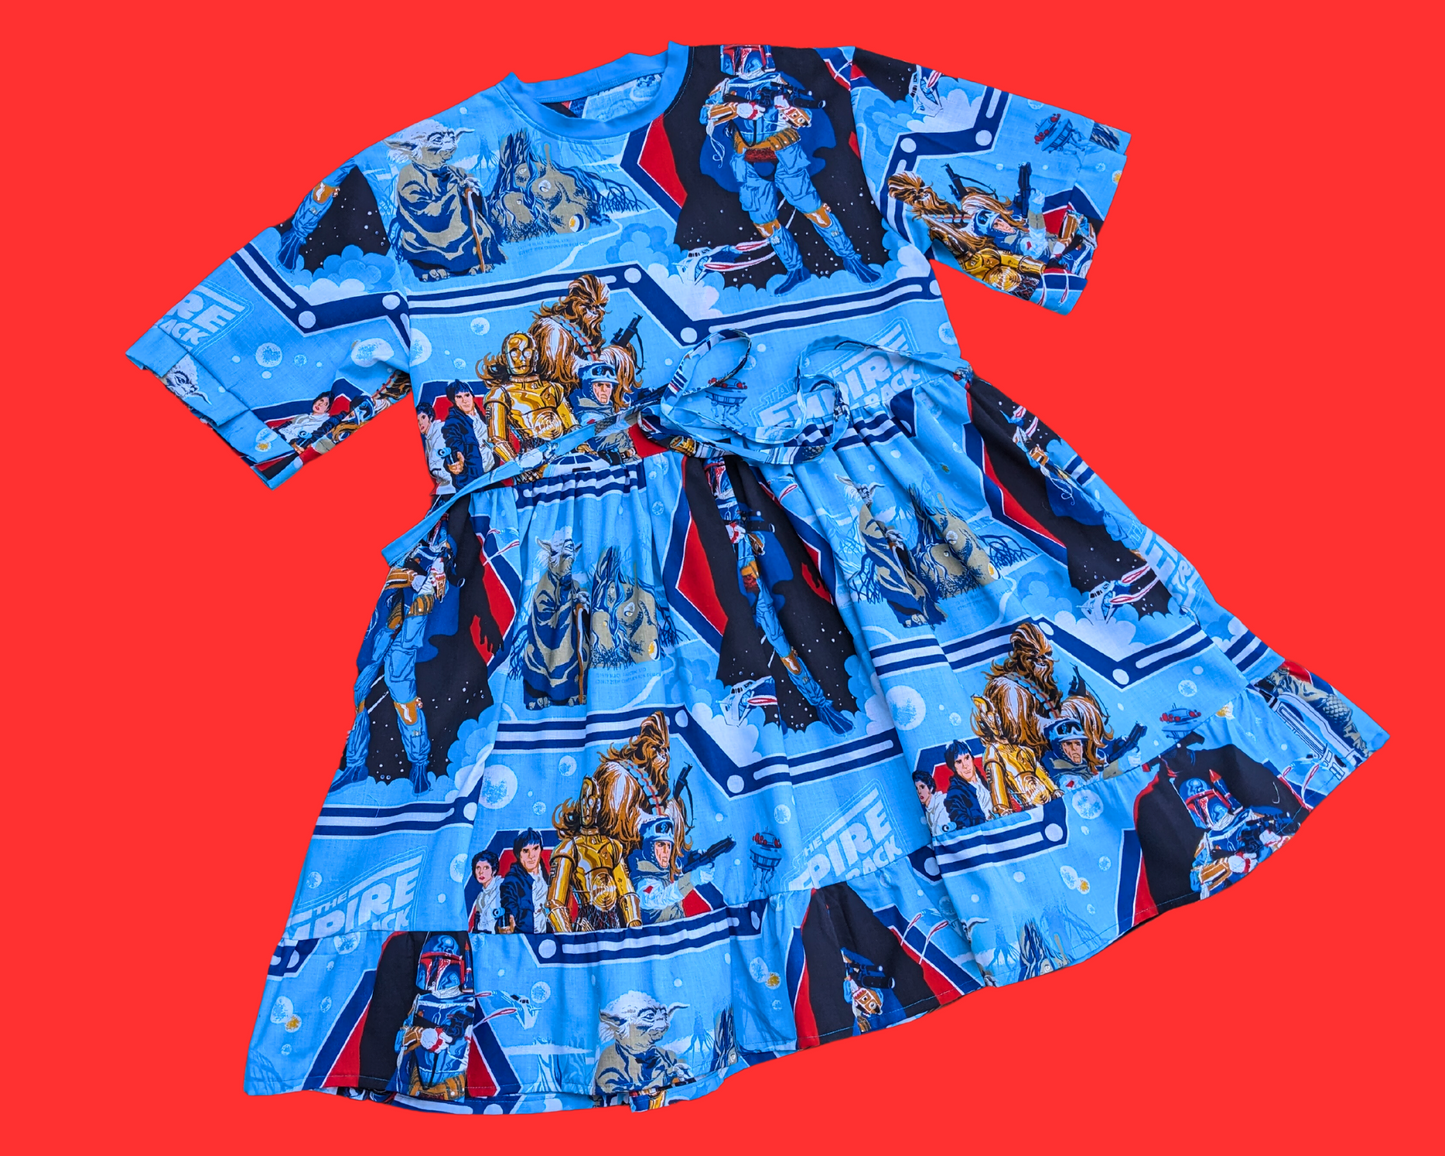 Handmade, Upcycled Vintage Star Wars The Empire Strikes Again Bedsheet T-Shirt Dress Fits S-M-L-XL with Matching Fanny Pack